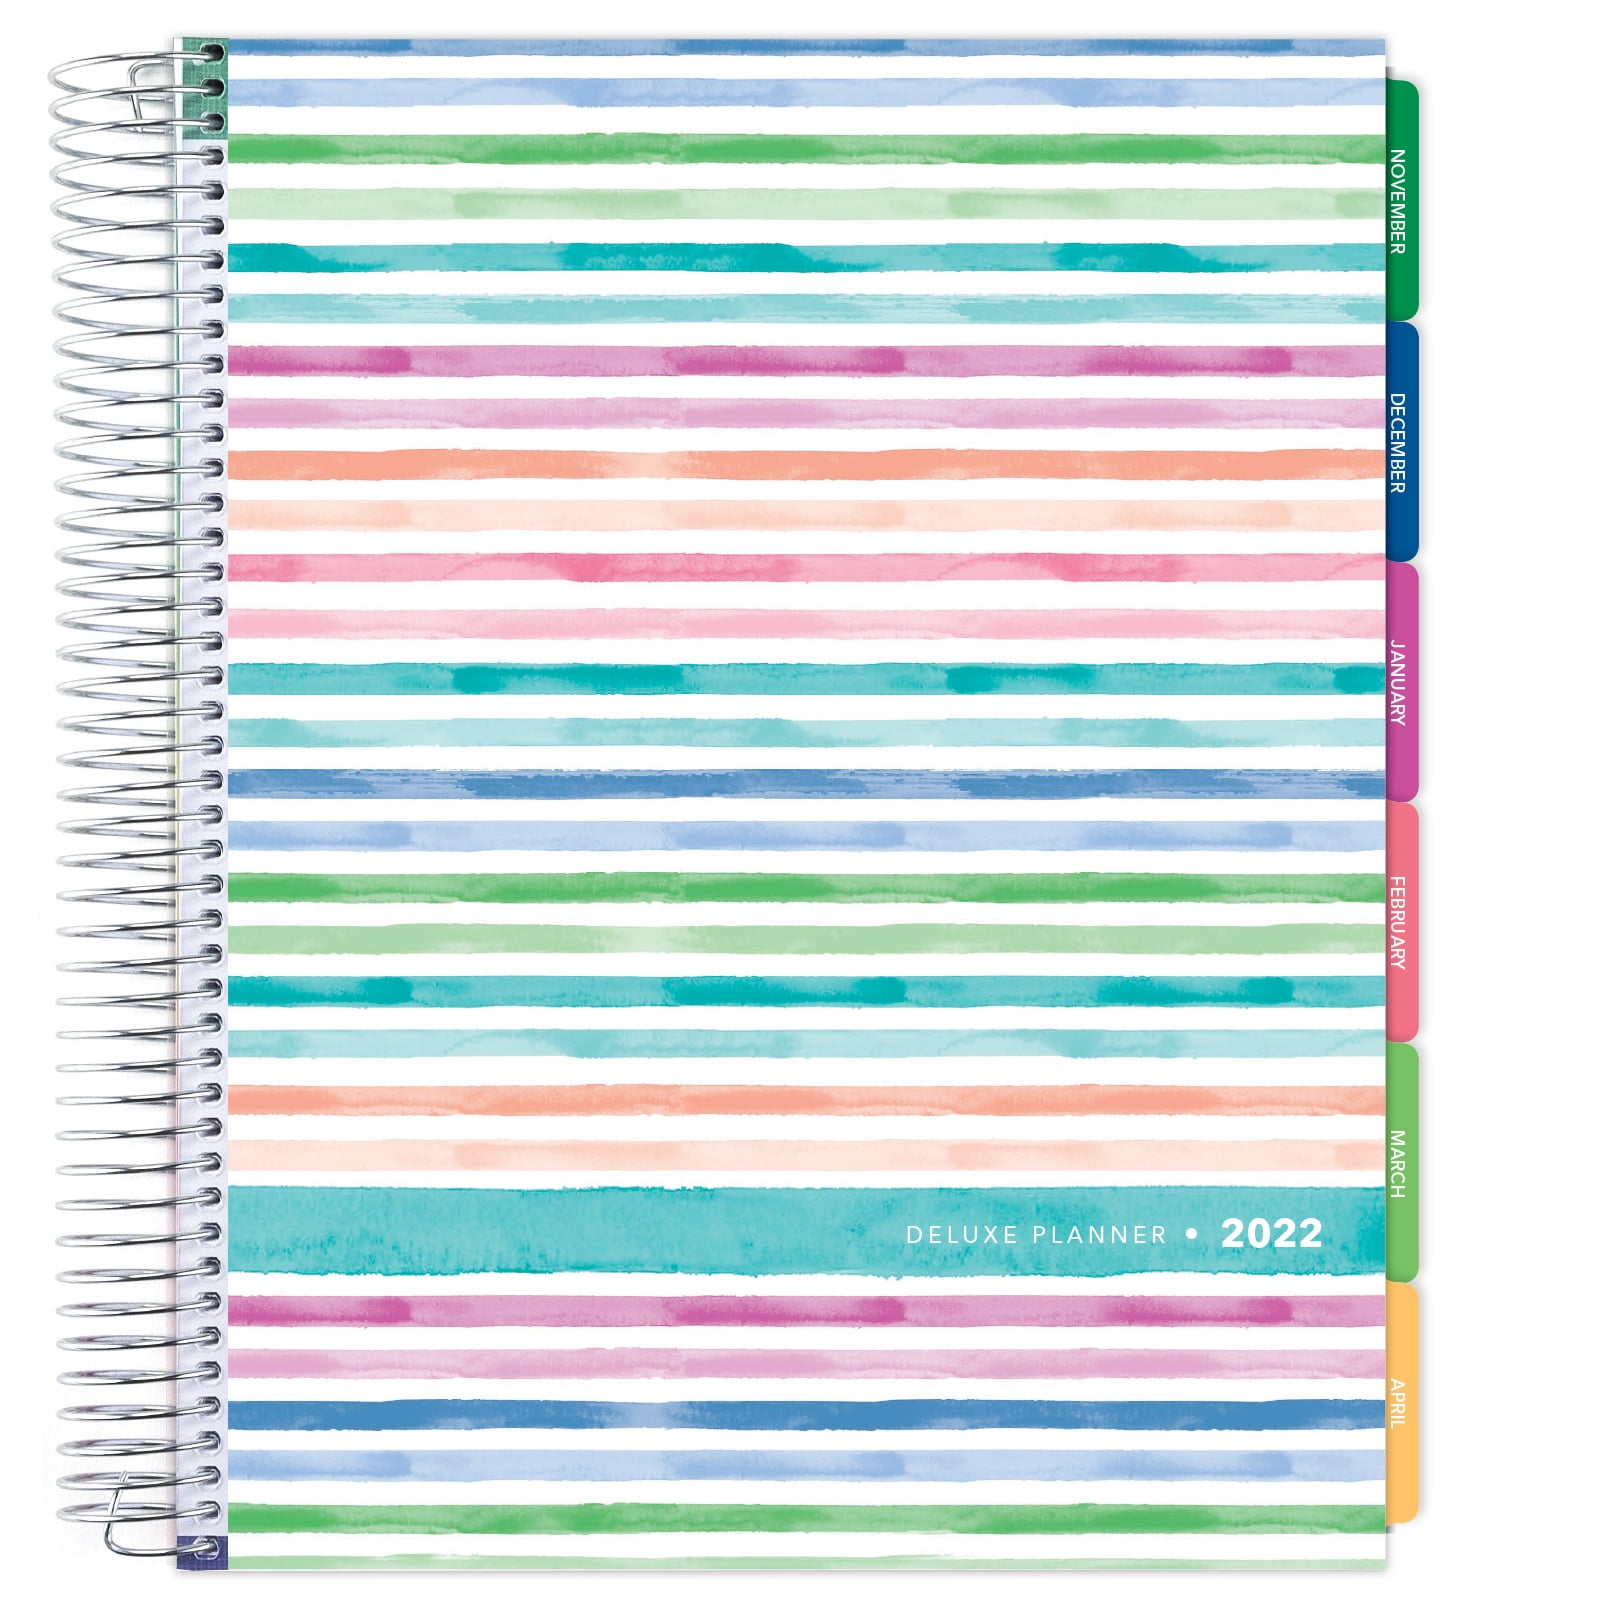 14 Months 2022 Planner 8.5"x11" Monthly & Weekly November 2021 Through 